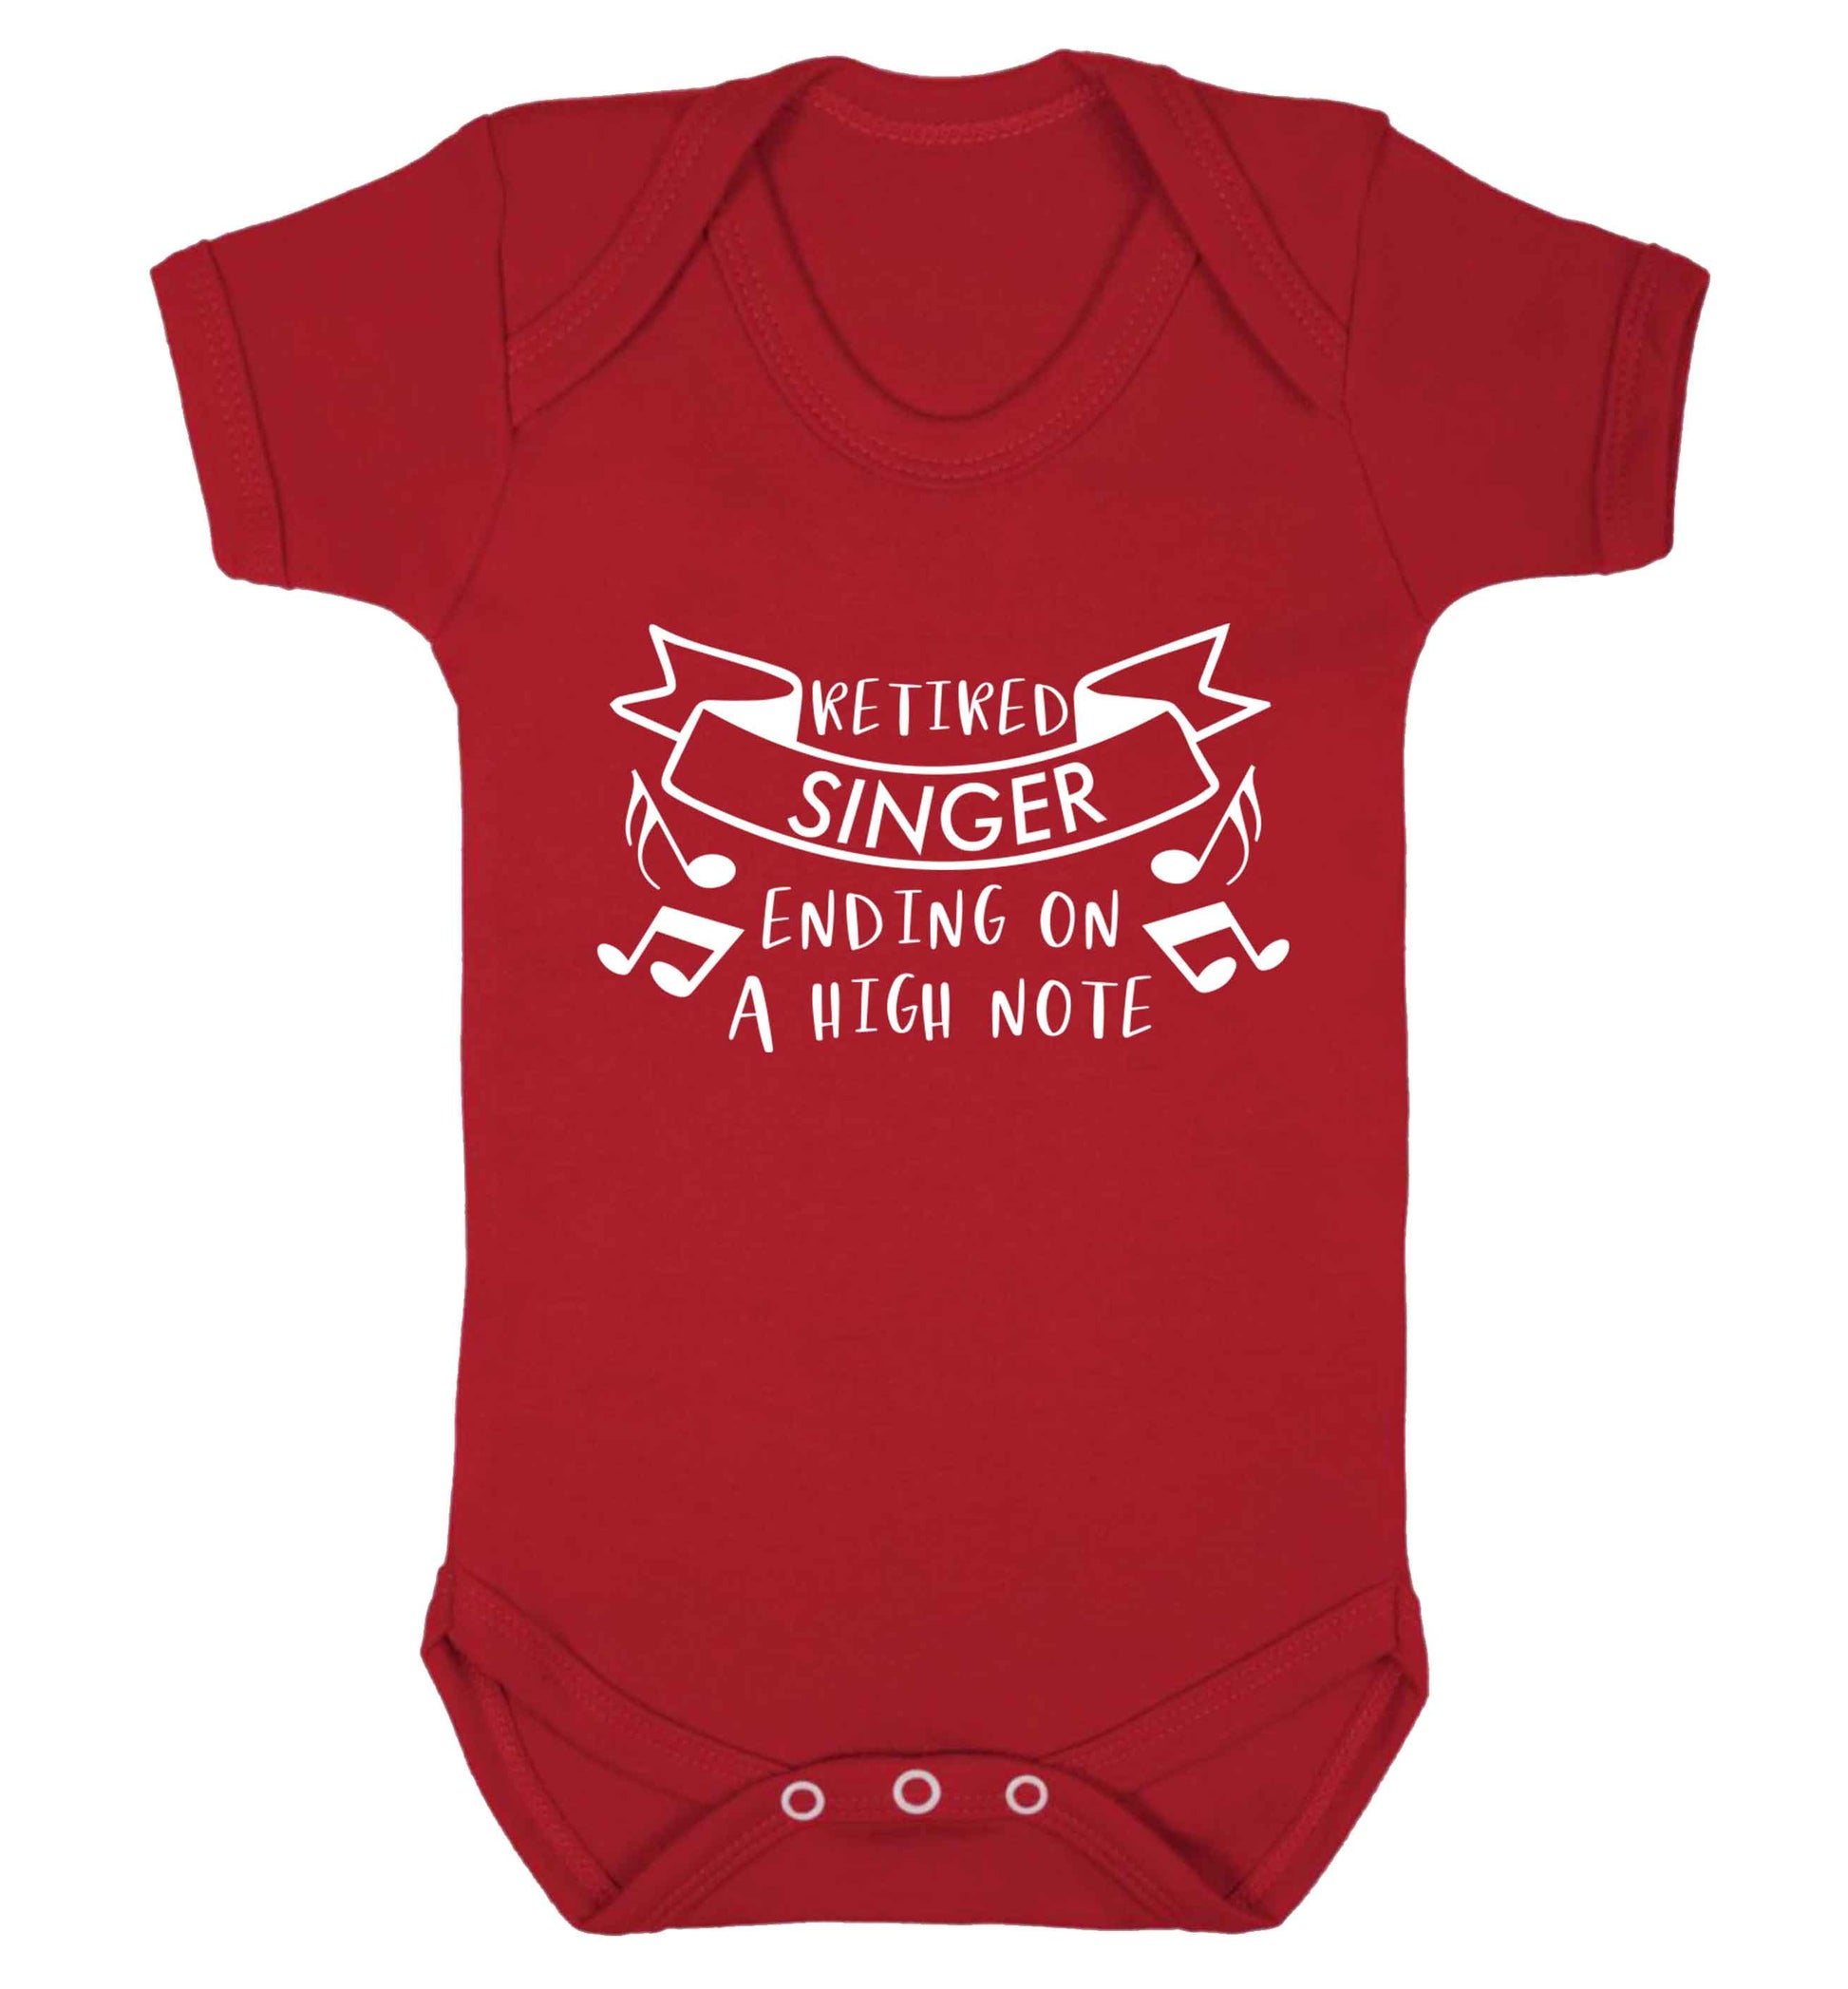 Retired singer ending on a high note Baby Vest red 18-24 months